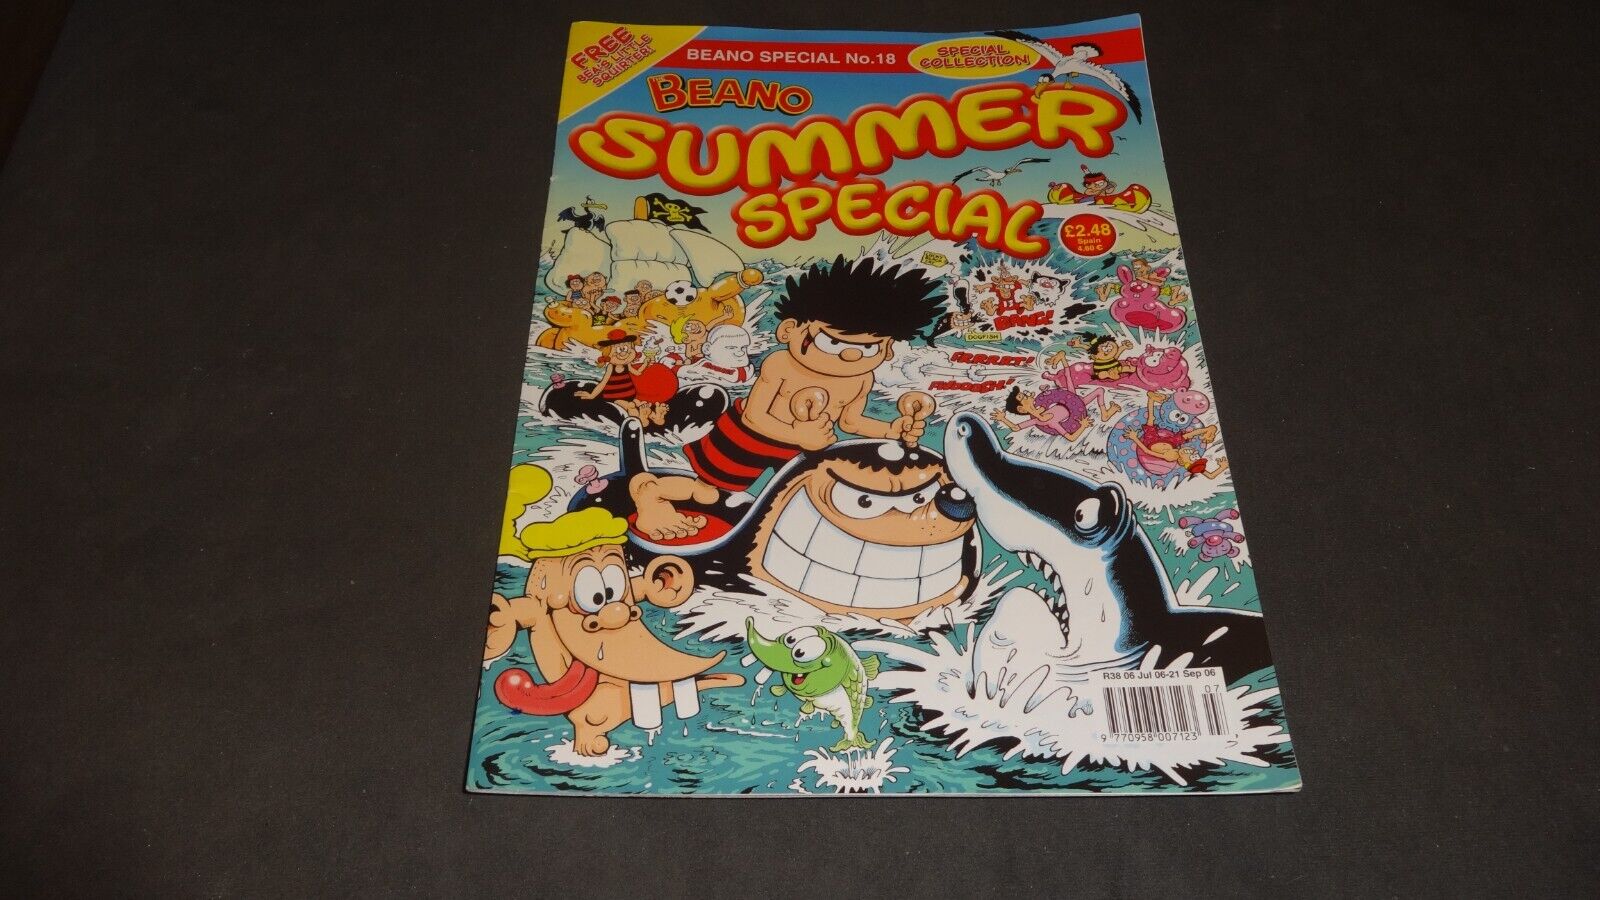 Beano Summer Special # 18 Comic from the UK-2021